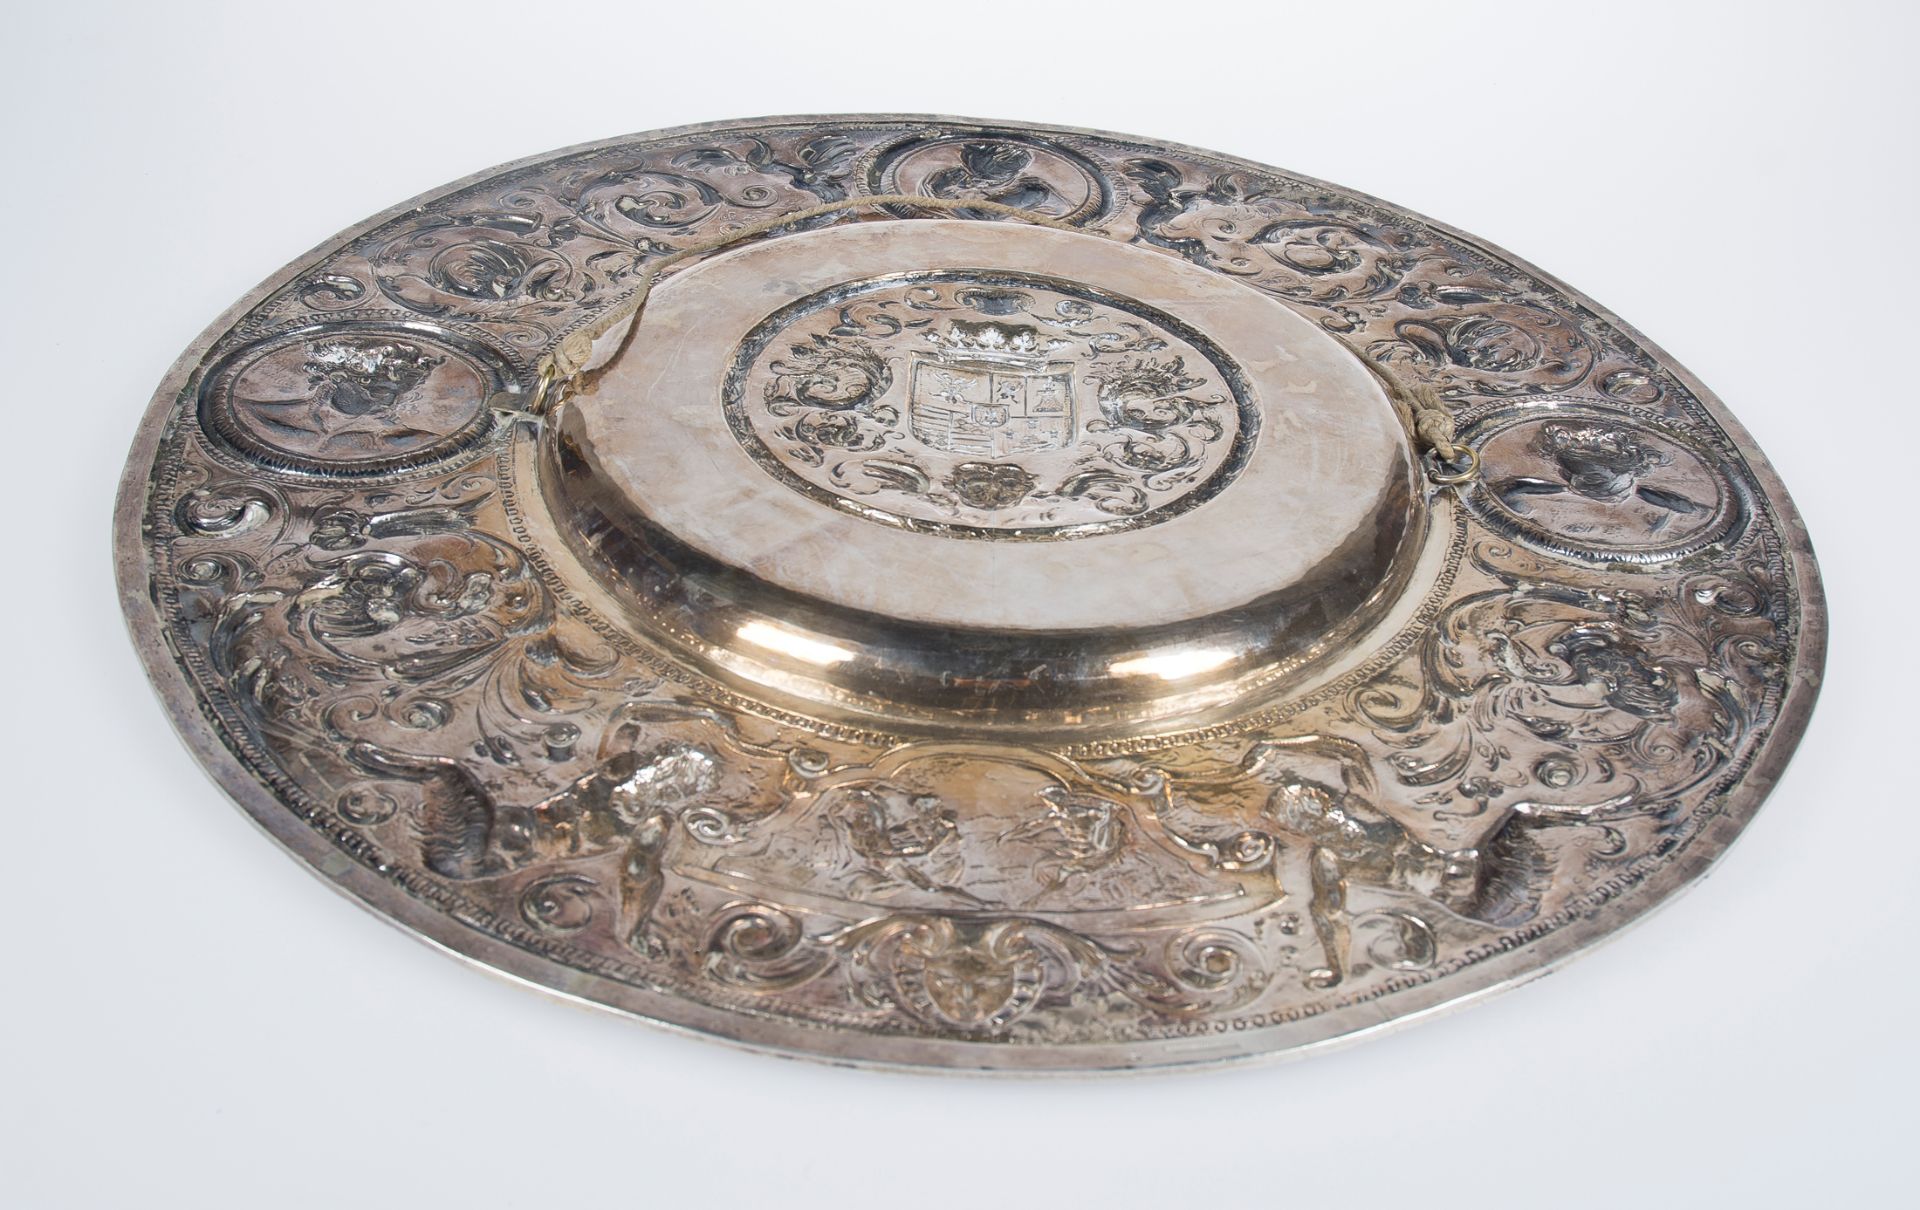 Large, embossed and chased silver plate. 19th century. - Image 7 of 7